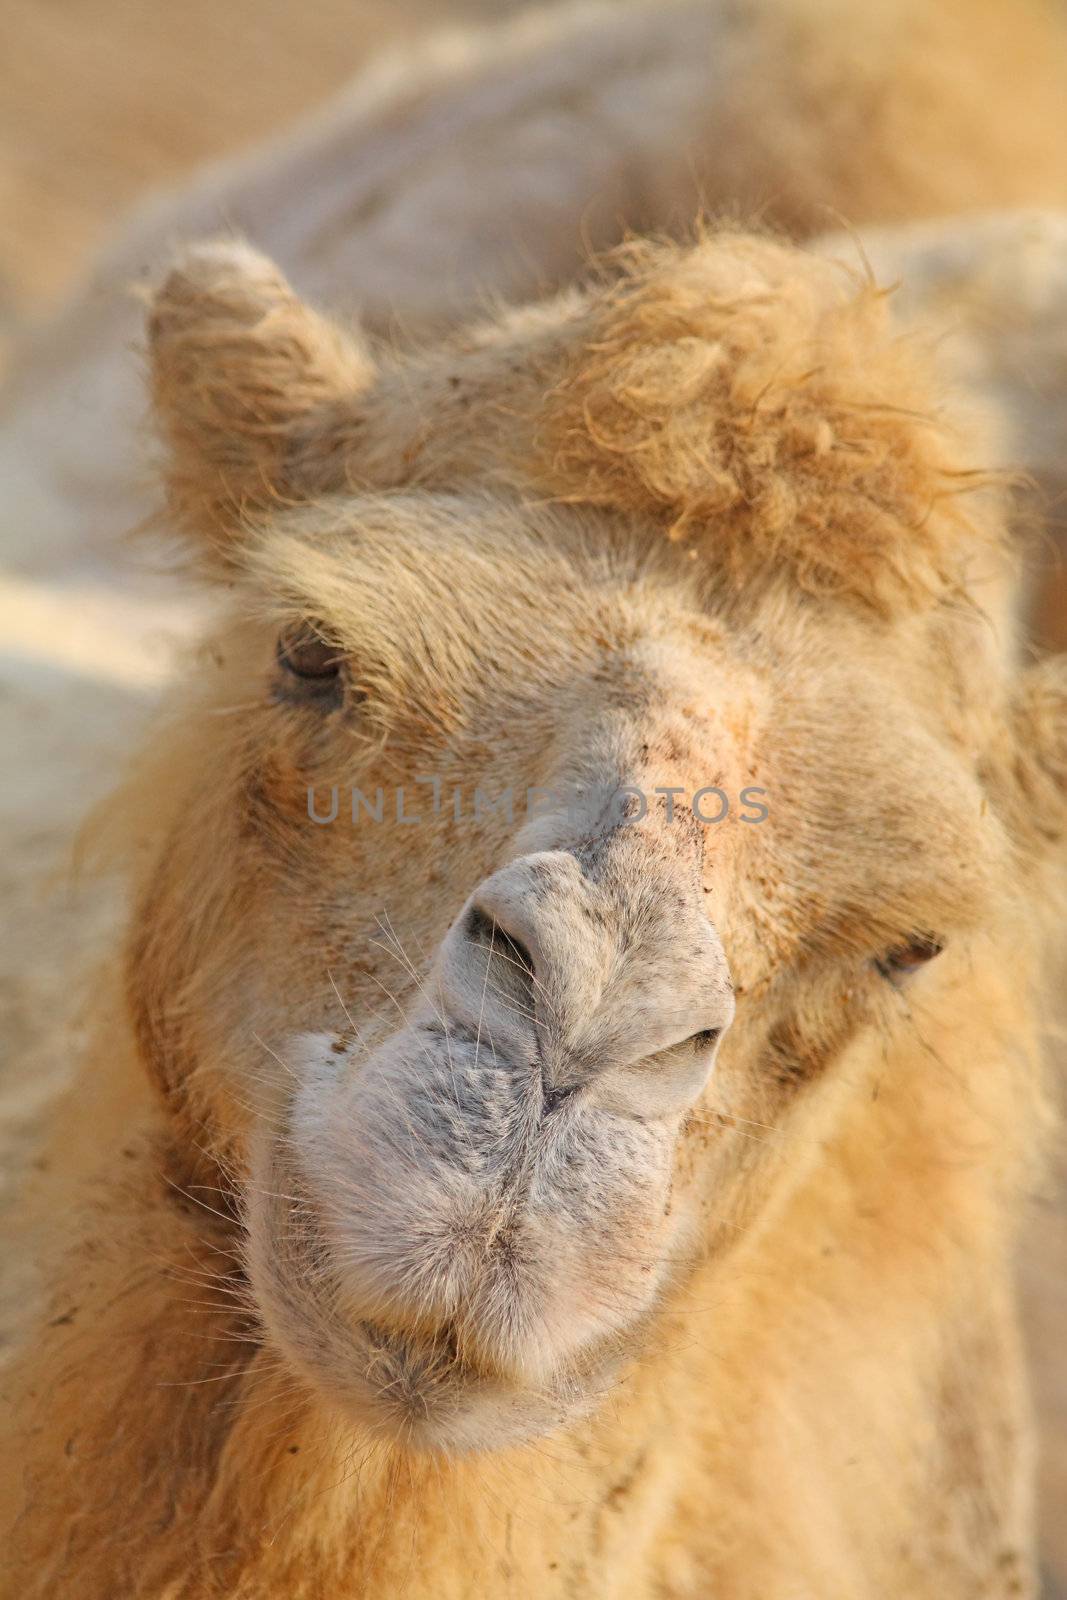 Close up of the camel's head.